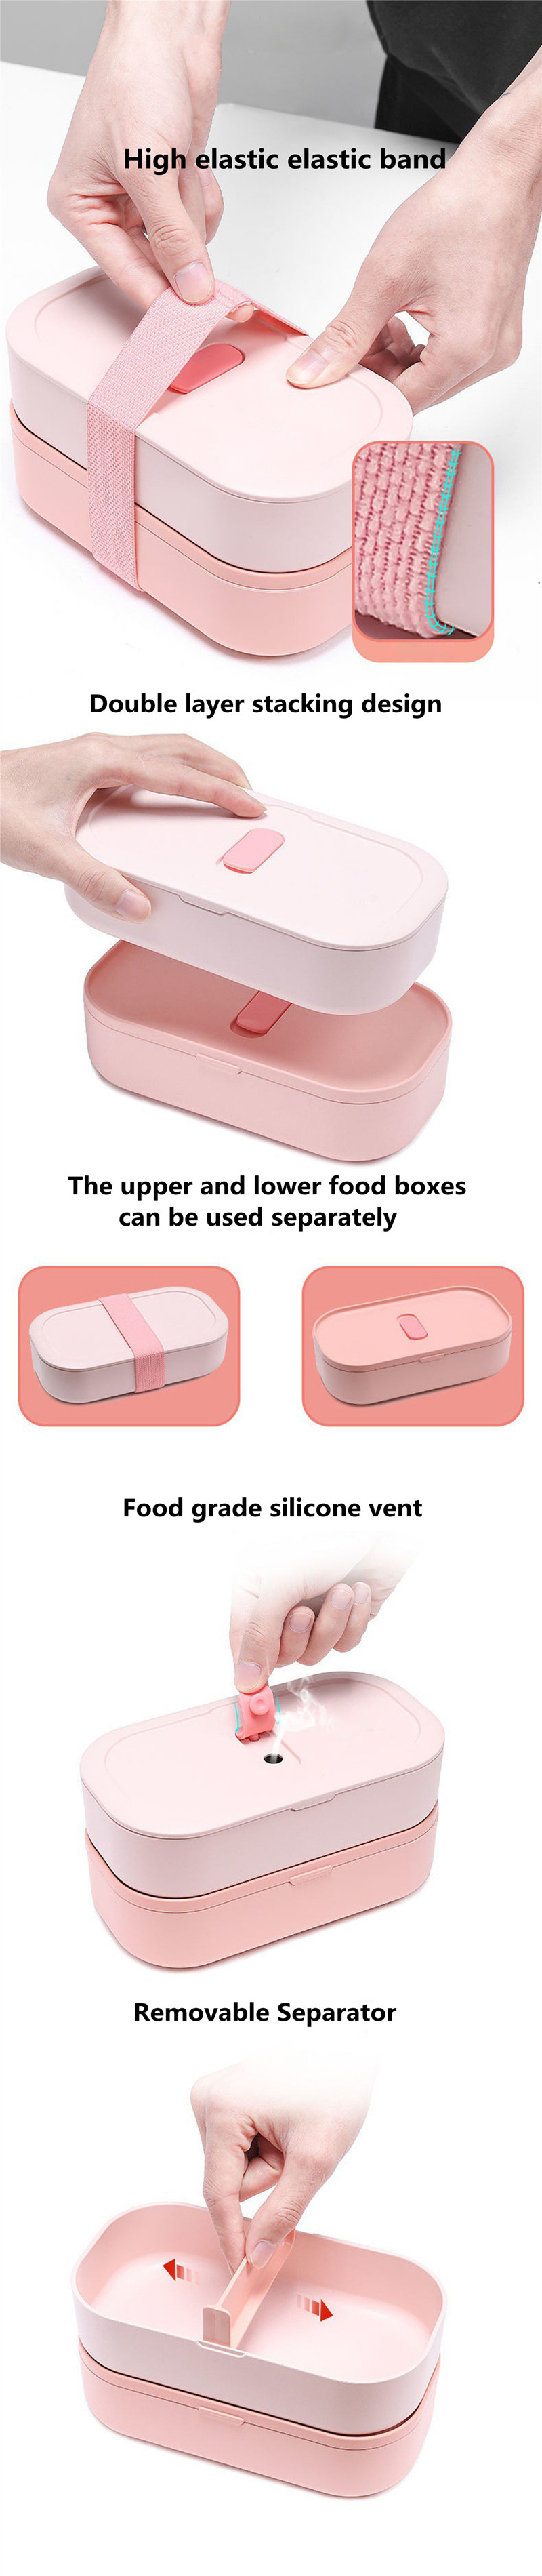 https://www.alibaba.com/product-detail/Microwaveable-Portable-Double-Layer-Eco-Friendly_1600623149003.html?spm=a2747.manage.0.0.2ca971d2H15Ati